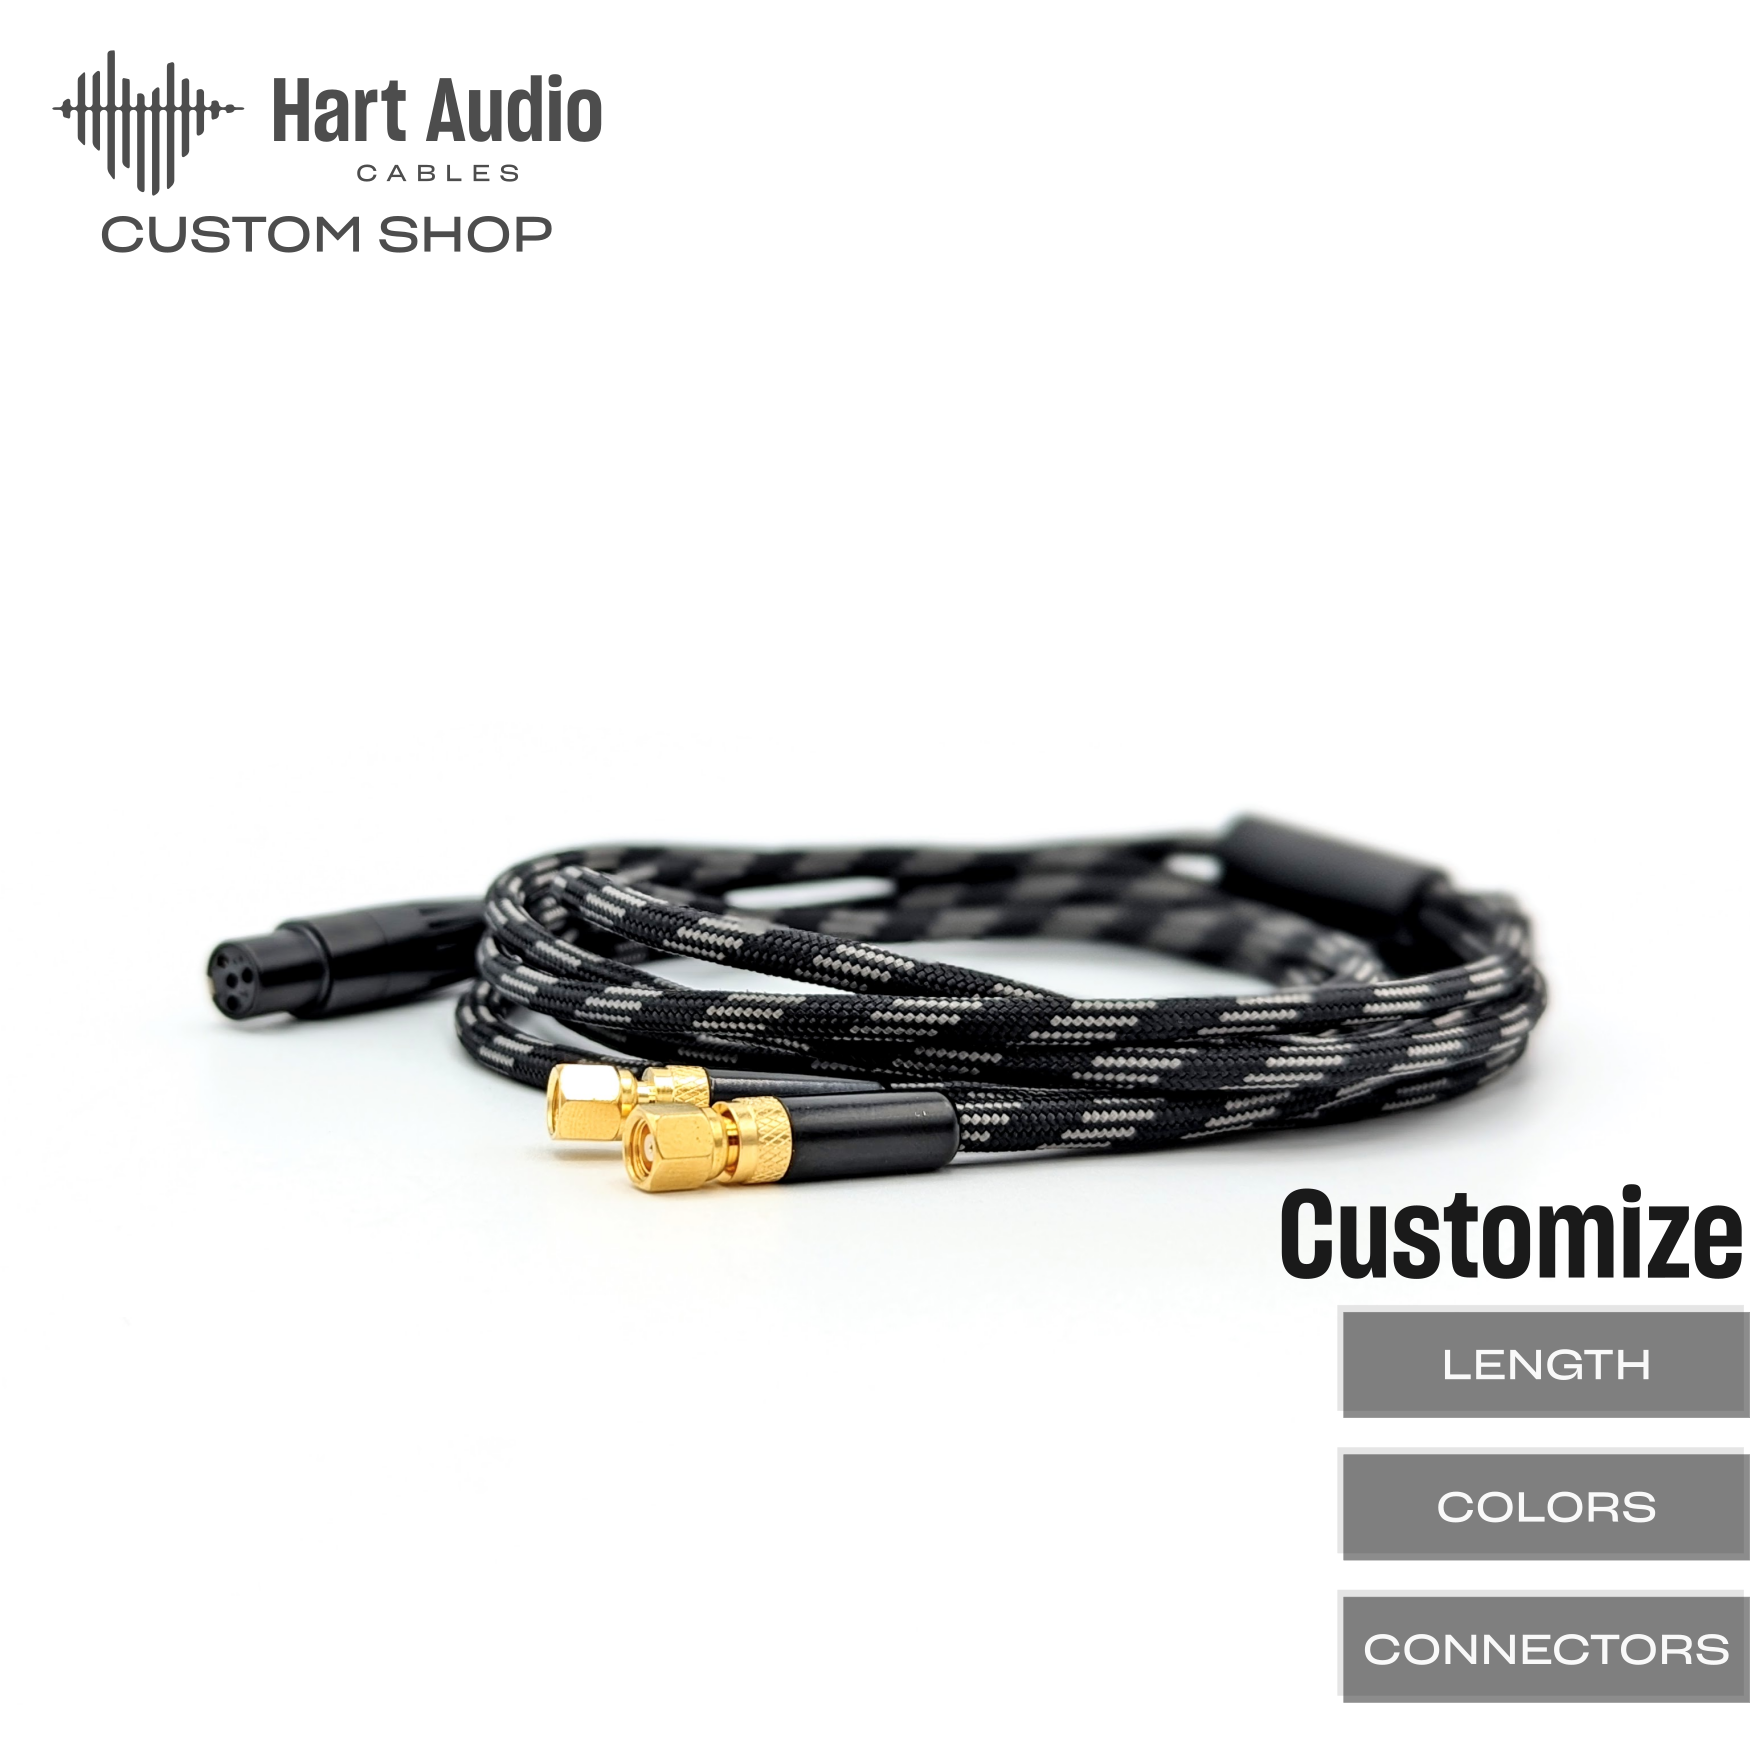 CST-HC-20: Dual Screw-on Balanced Headphone Cable for Hifiman HE-400 + more